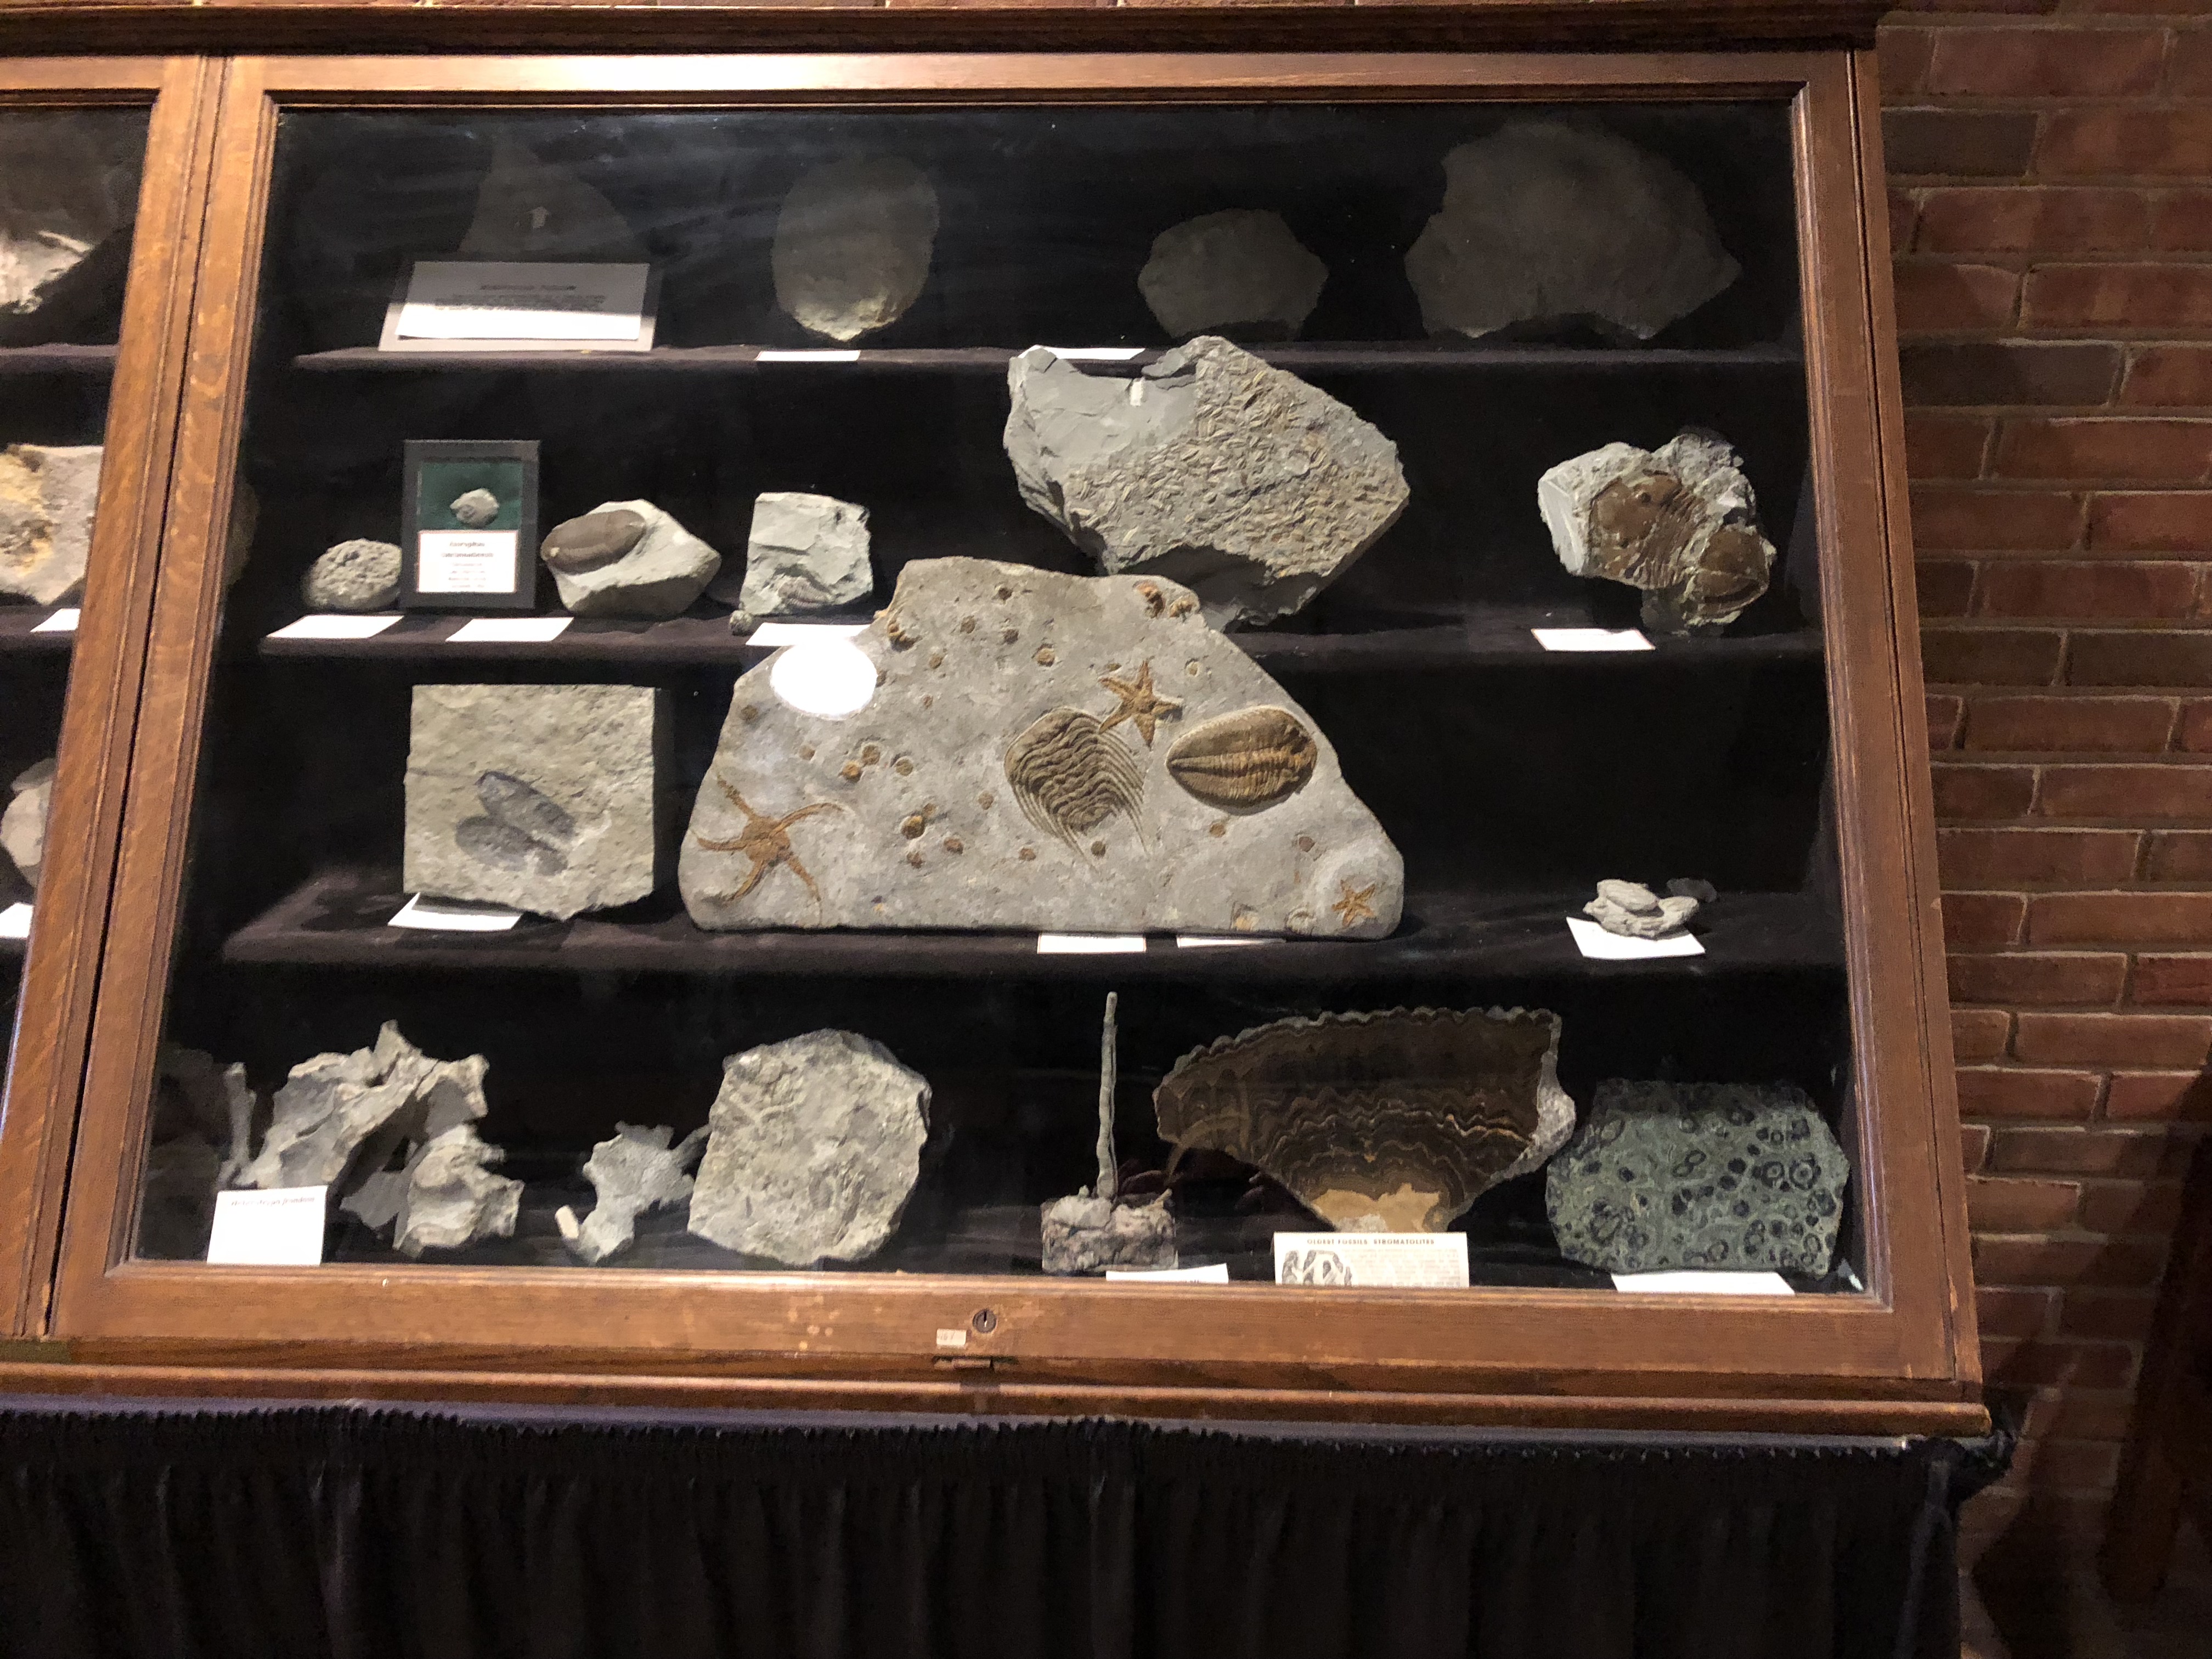 Picture of collected specimens of rocks, minerals and fossils in the Geophysics building.